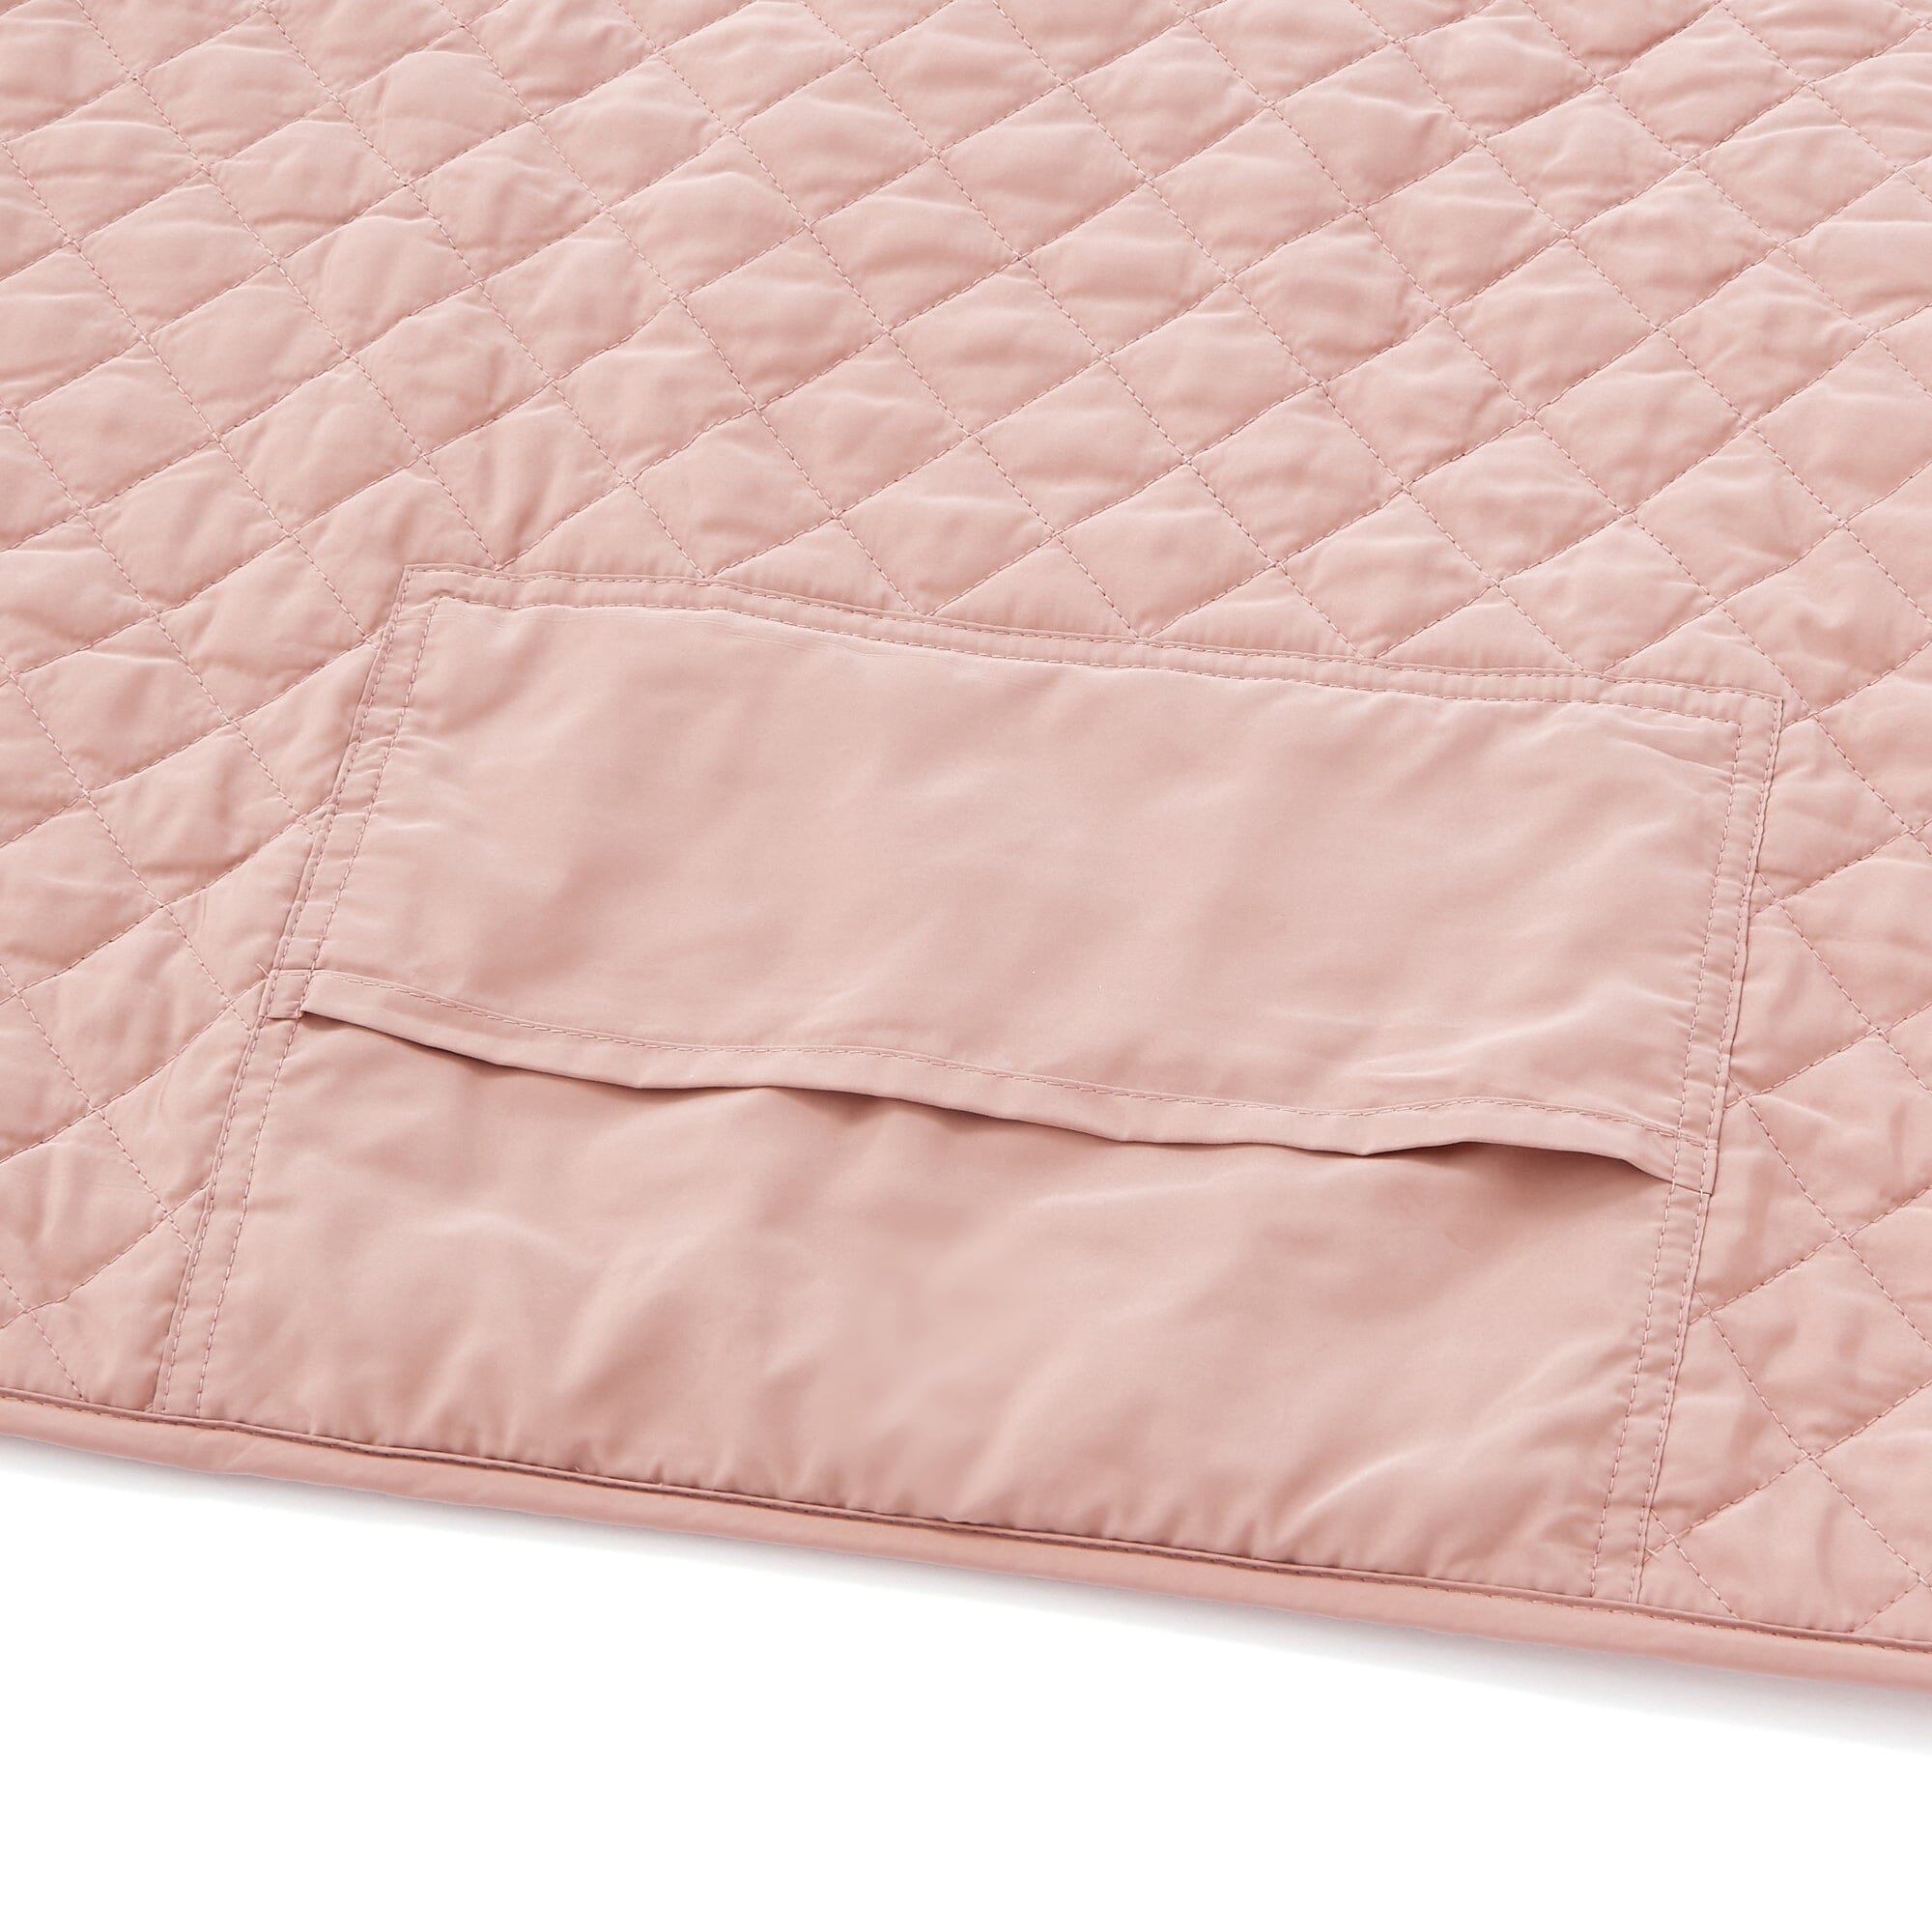 Quilting 3 Way Portable Throw 700 × 1000 Pink